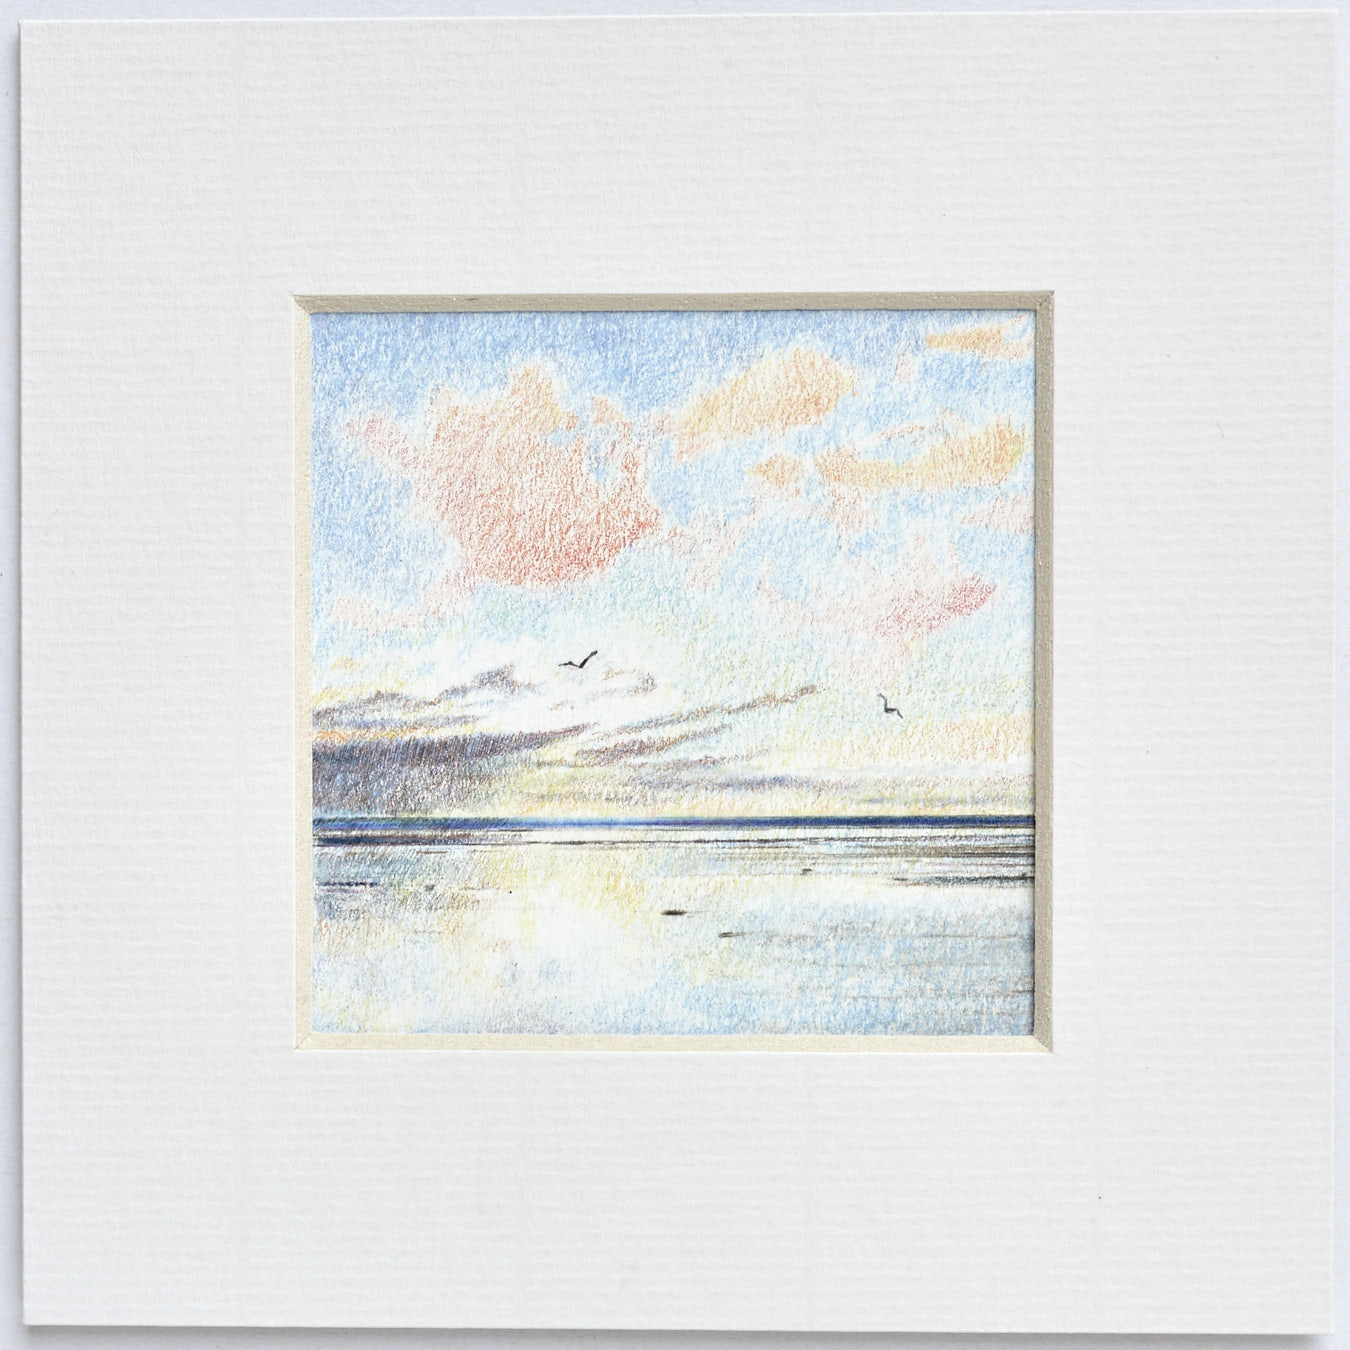 Large image of original colour pencil drawing Sunset over the sea by Timothy Gent